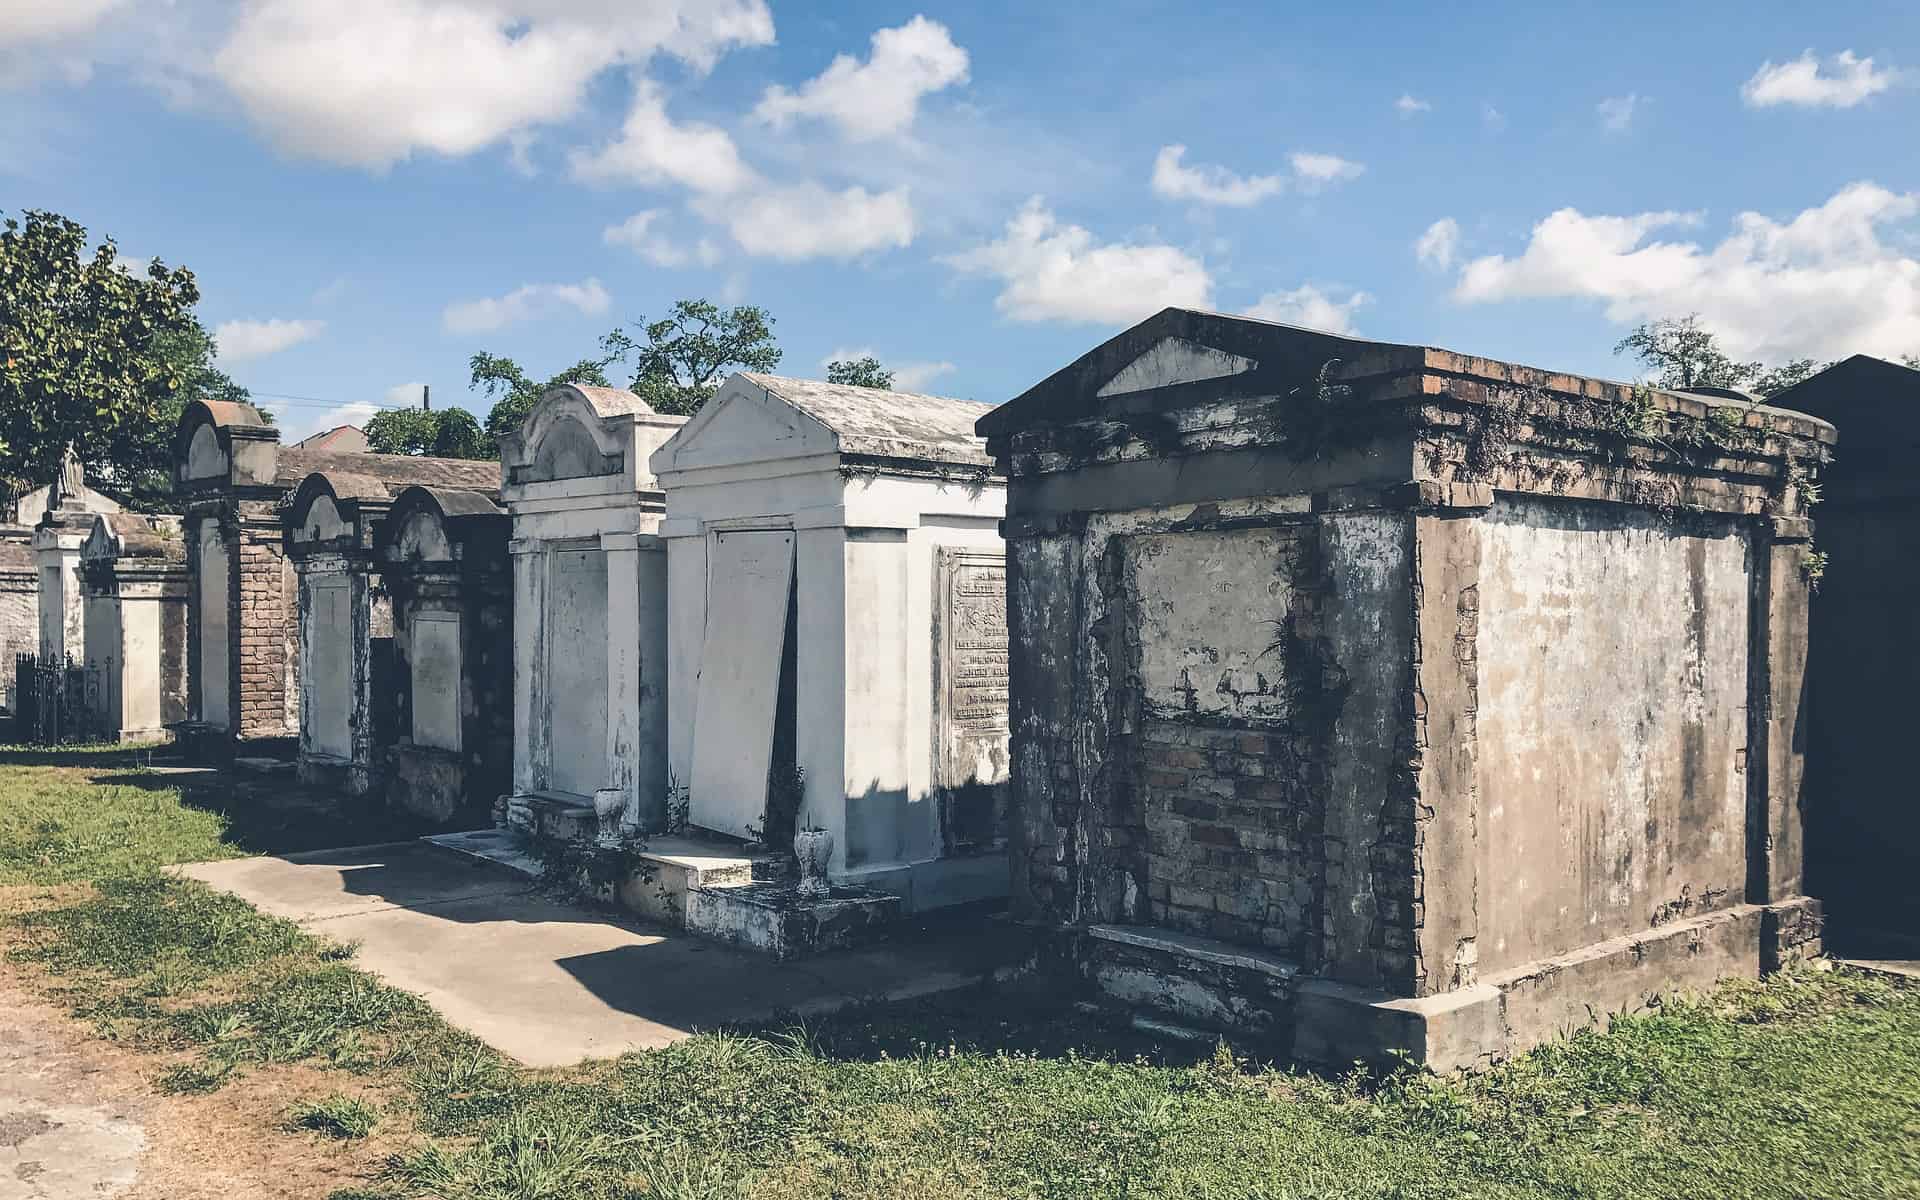 cemetary new-orleans-2527583_1920 pixabay hudsoncrafted